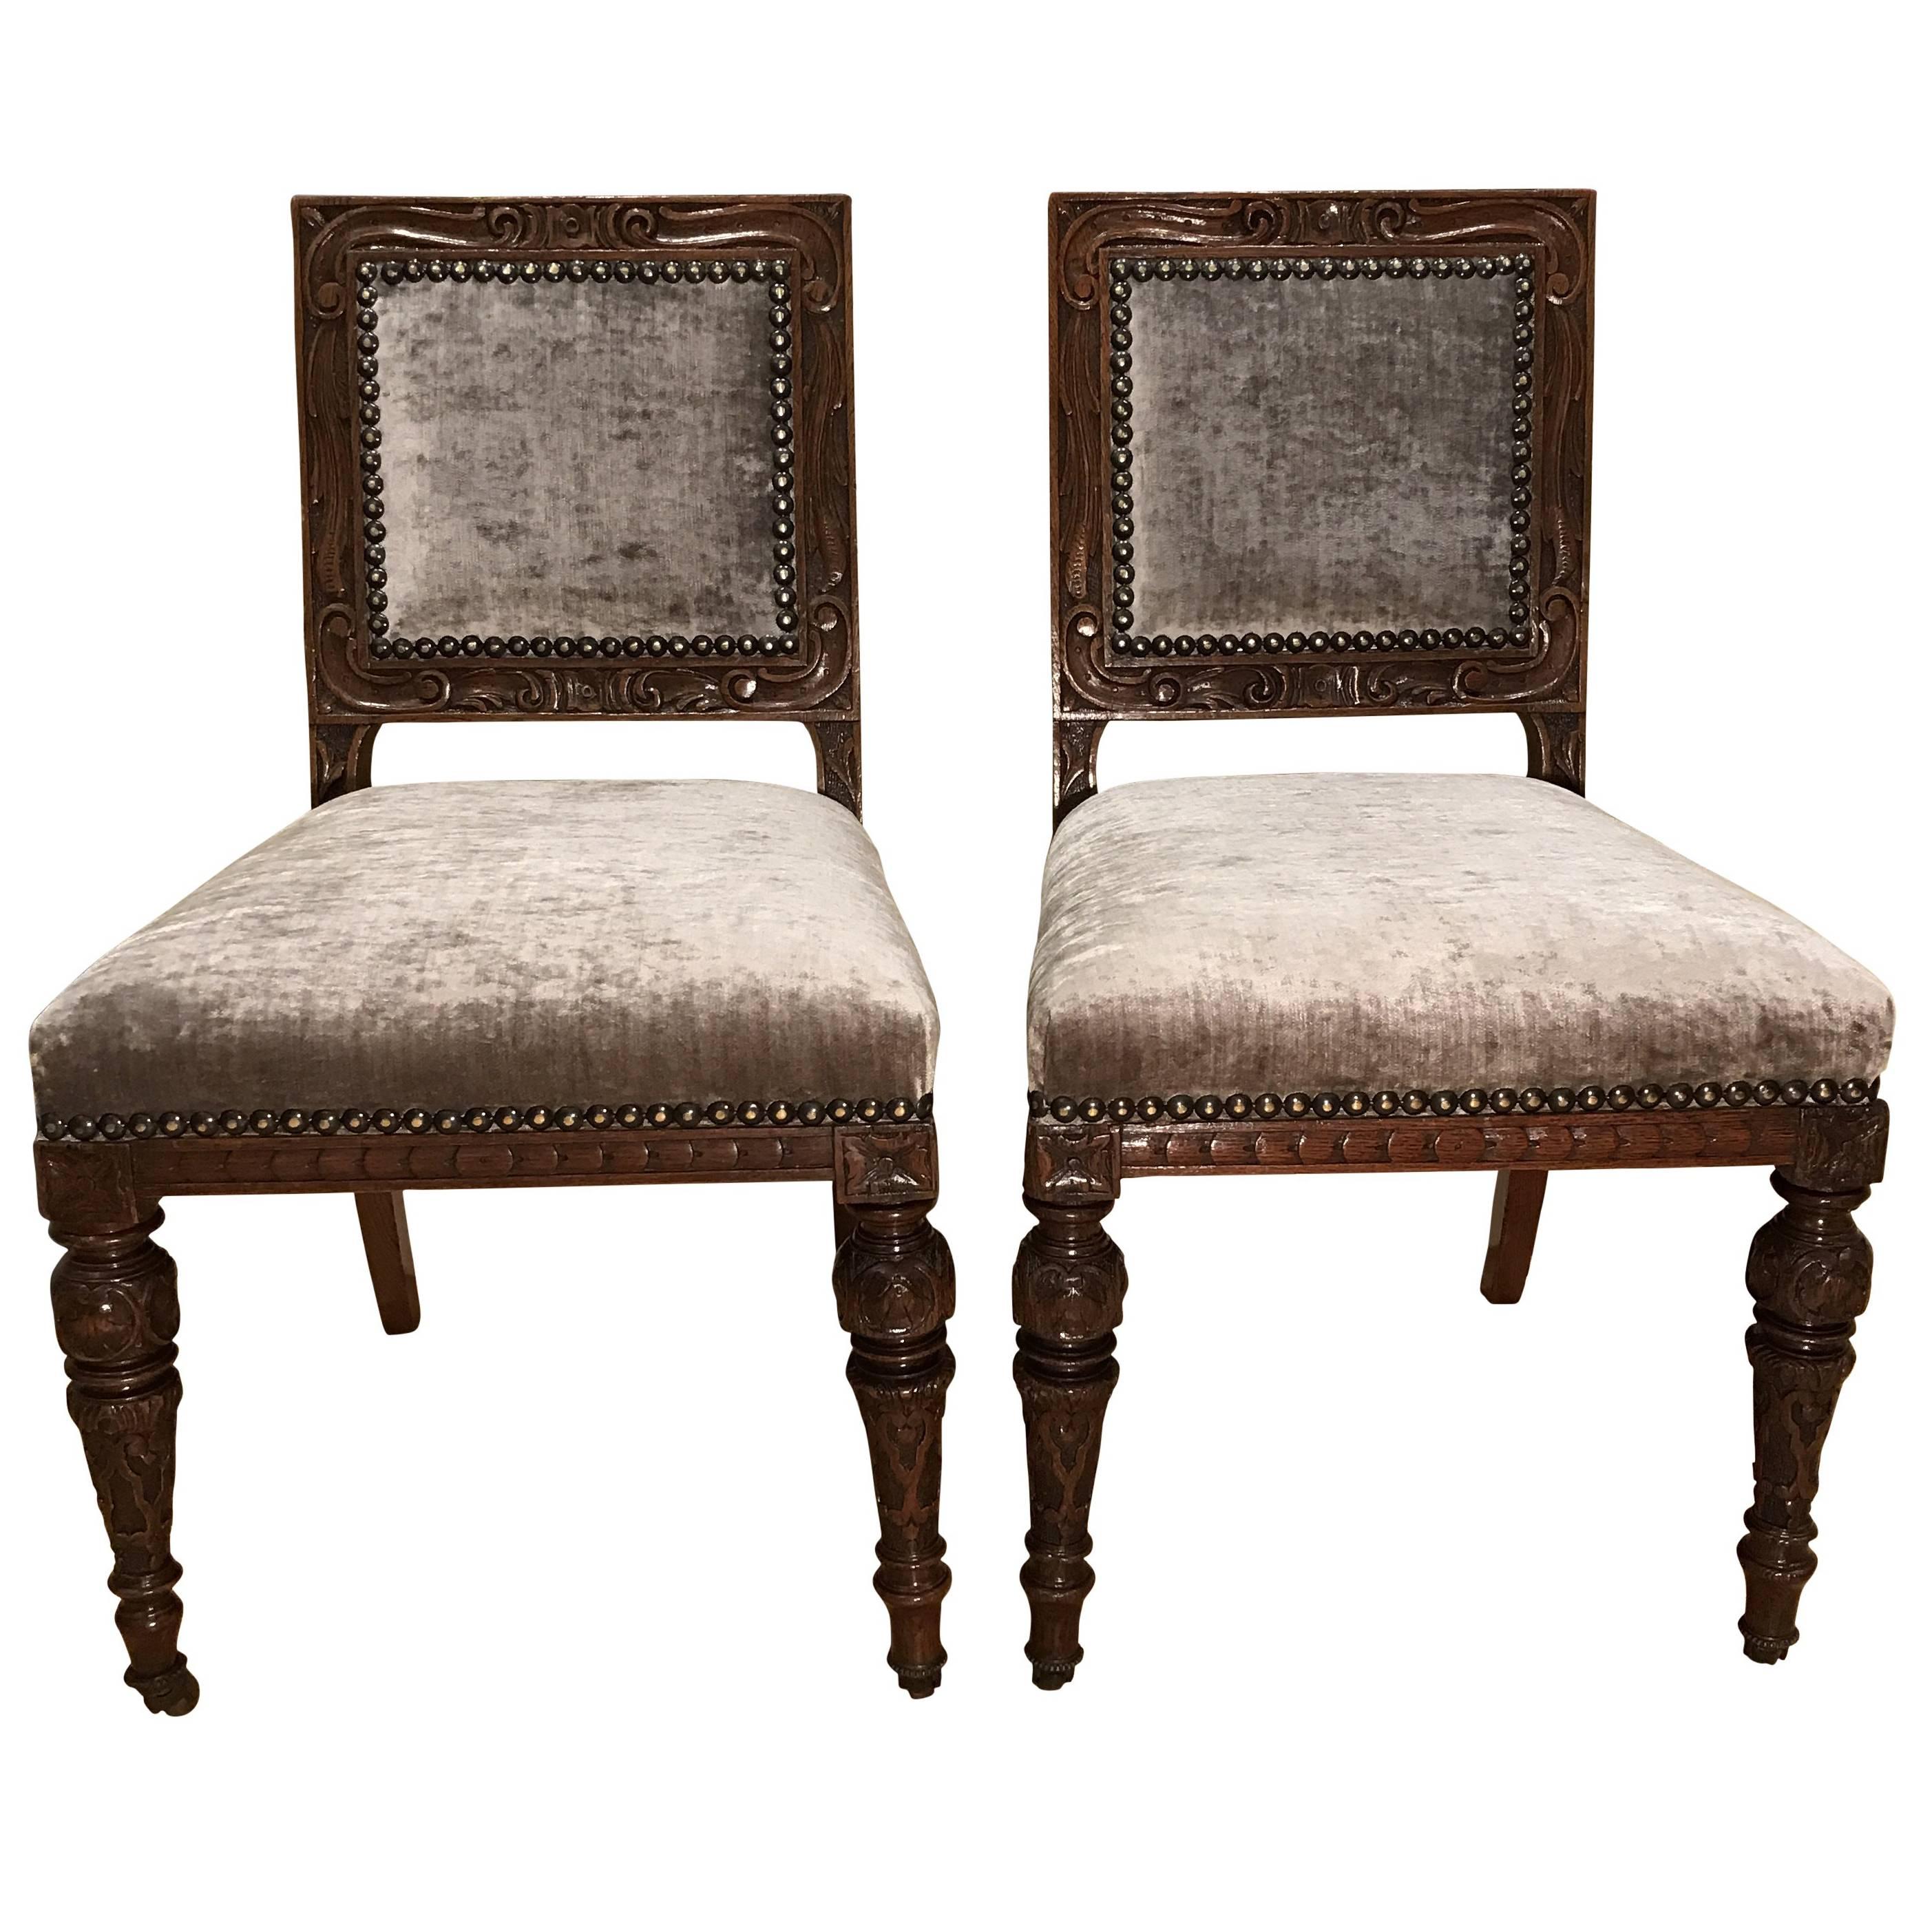 Beautiful set of twelve early Victorian carved oak dining chairs recently re-upholstered in a hard wearing easy to clean mink velvet fabric with brass stud surround. They are deep mahogany in colour.  Attributed to Gillows.